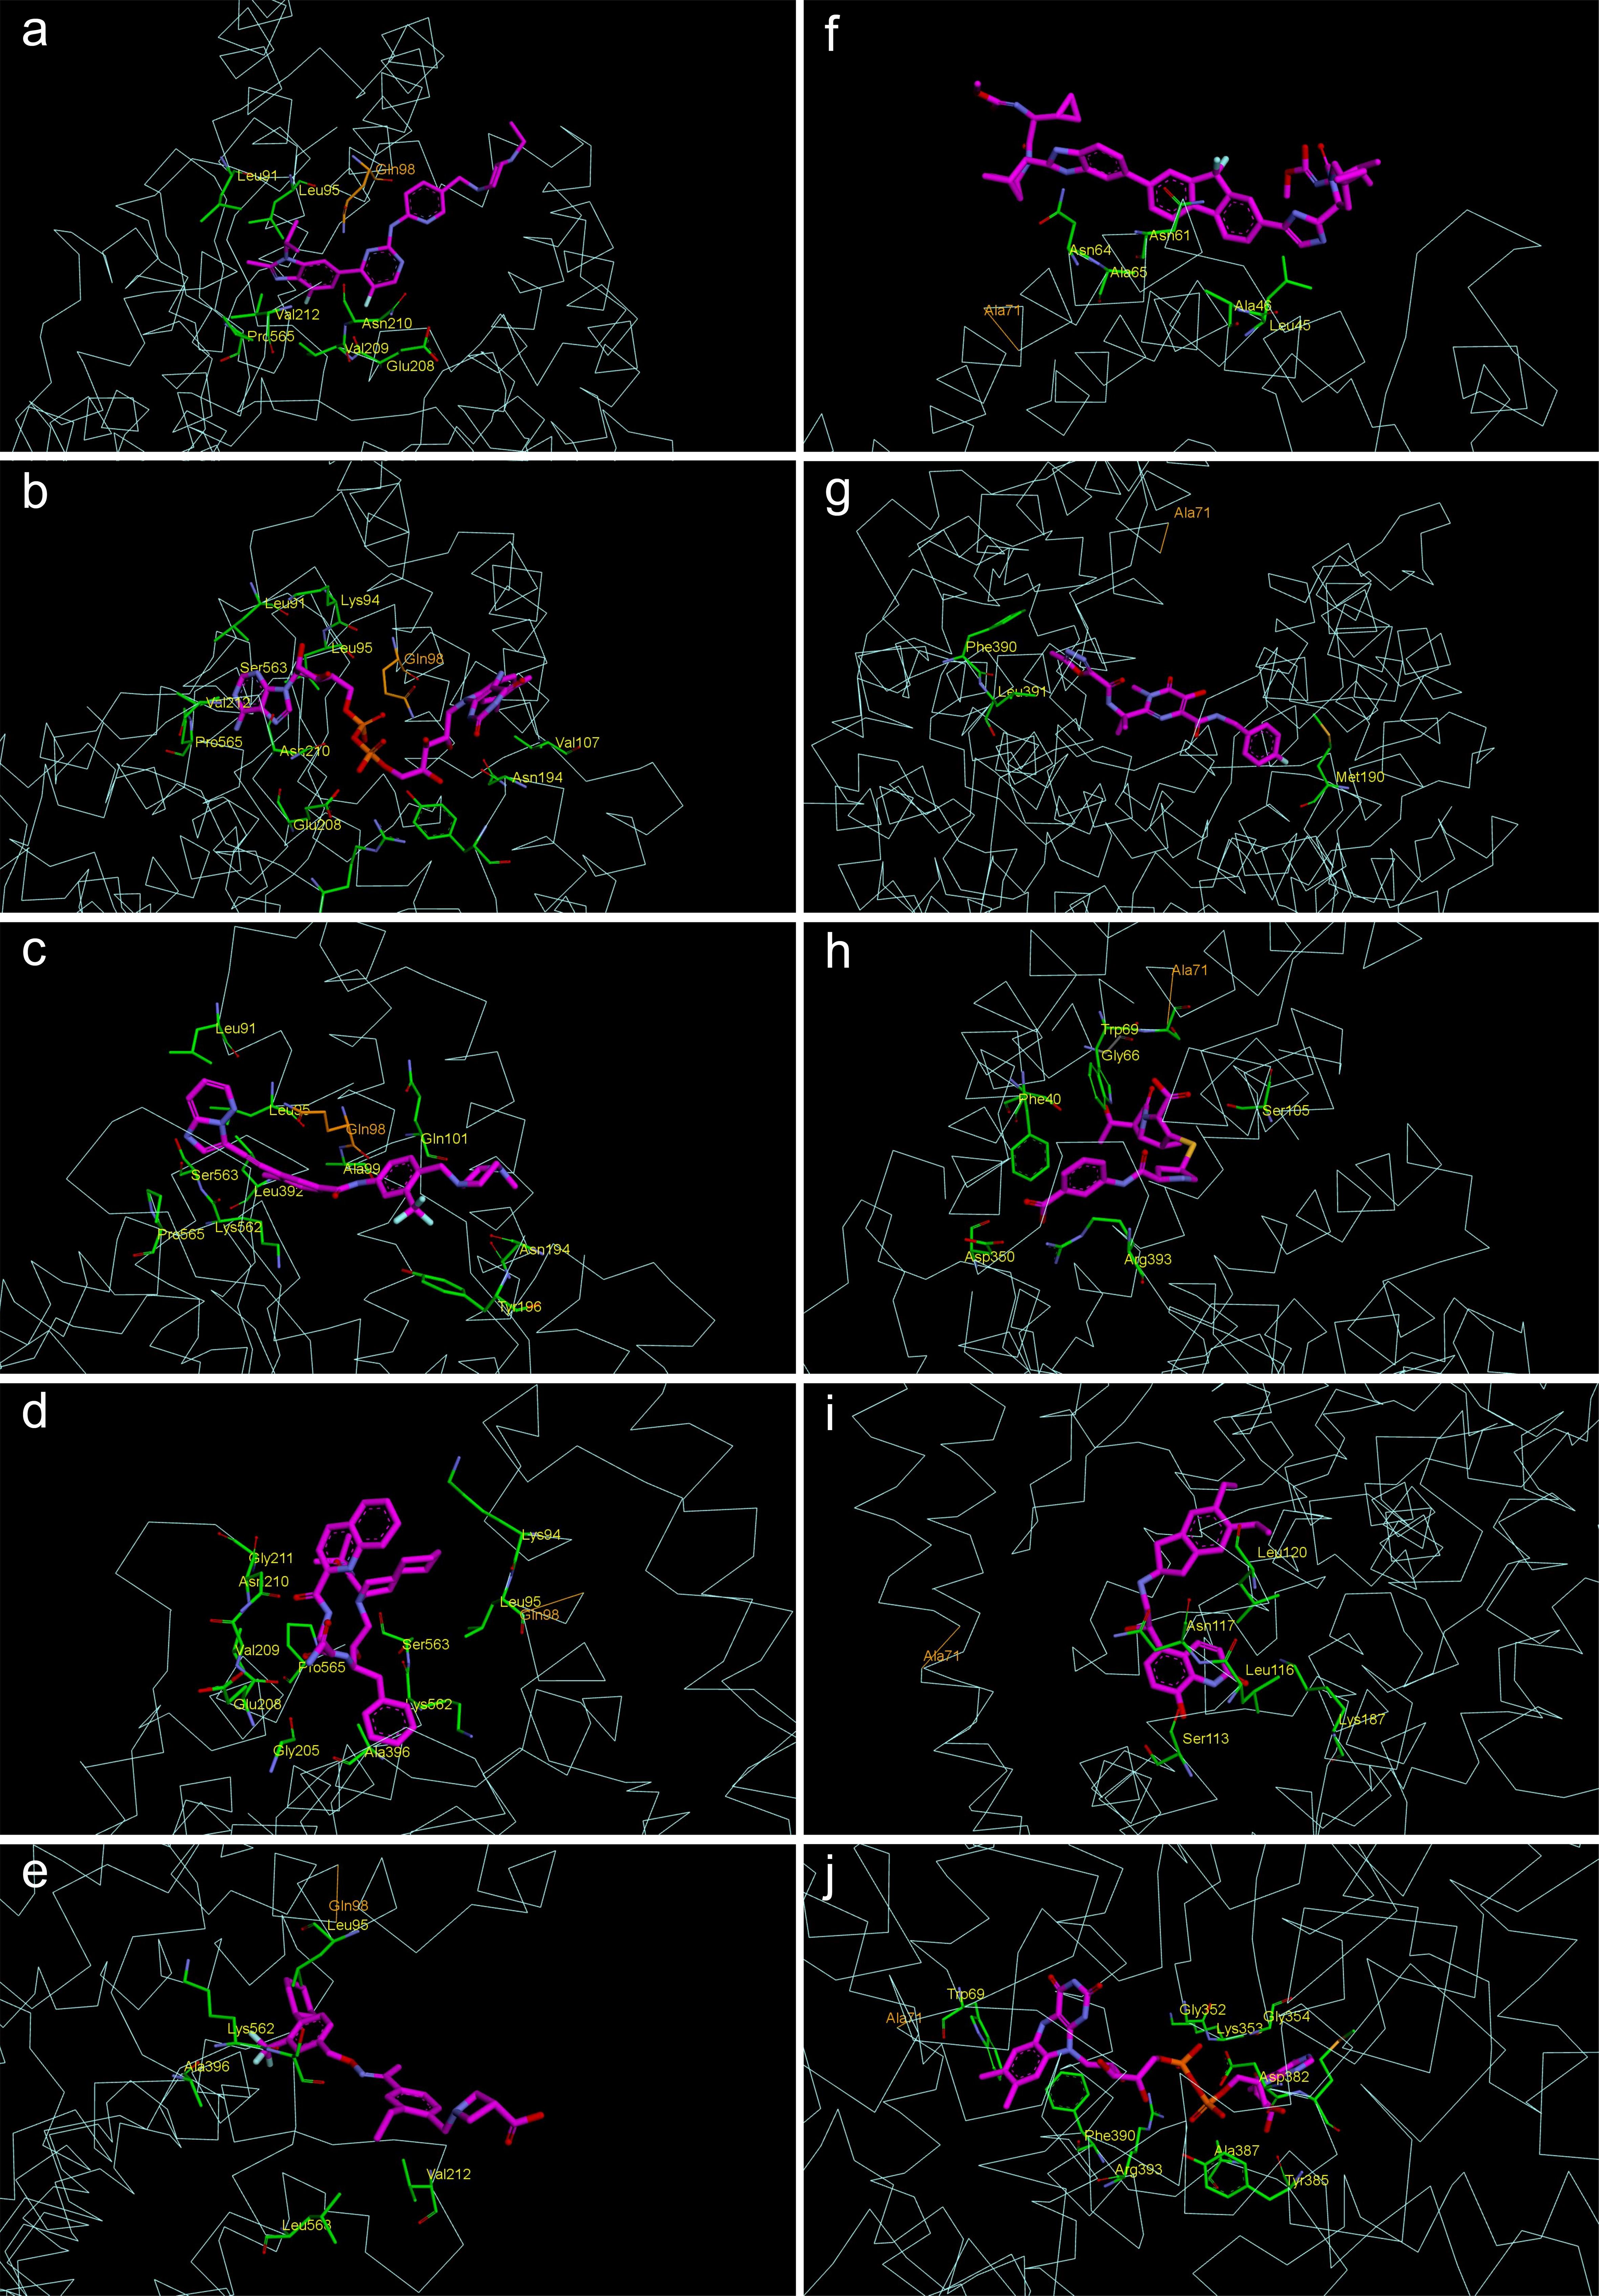 Binding positions of the drugs with the best scores in ACE2 receptor after 100-ns MD and their docking free energy (DFE) in (a–e) Site 1 and (f–h) Site 2: (a) Abemaciclib, −9.9 kcal/mol. (b) Flavin adenine dinucleotide (FAD), −9.9 kcal/mol. (c) Ponatinib, −9.9 kcal/mol. (d) Saquinavir, −9.9 kcal/mol. (e) Siponimod, −9.9 kcal/mol. (f) Ledipasvir, −9.1 kcal/mol. (g) Raltegravir, −9.1 kcal/mol. (h) Ertapenem, −8.8 kcal/mol. (i) Indacaterol, −8.1 kcal/mol. (j) FAD, −8.6 kcal/mol. ACE2, angiotensin-converting enzyme 2; DFE, docking free energy; MD, molecular dynamics.